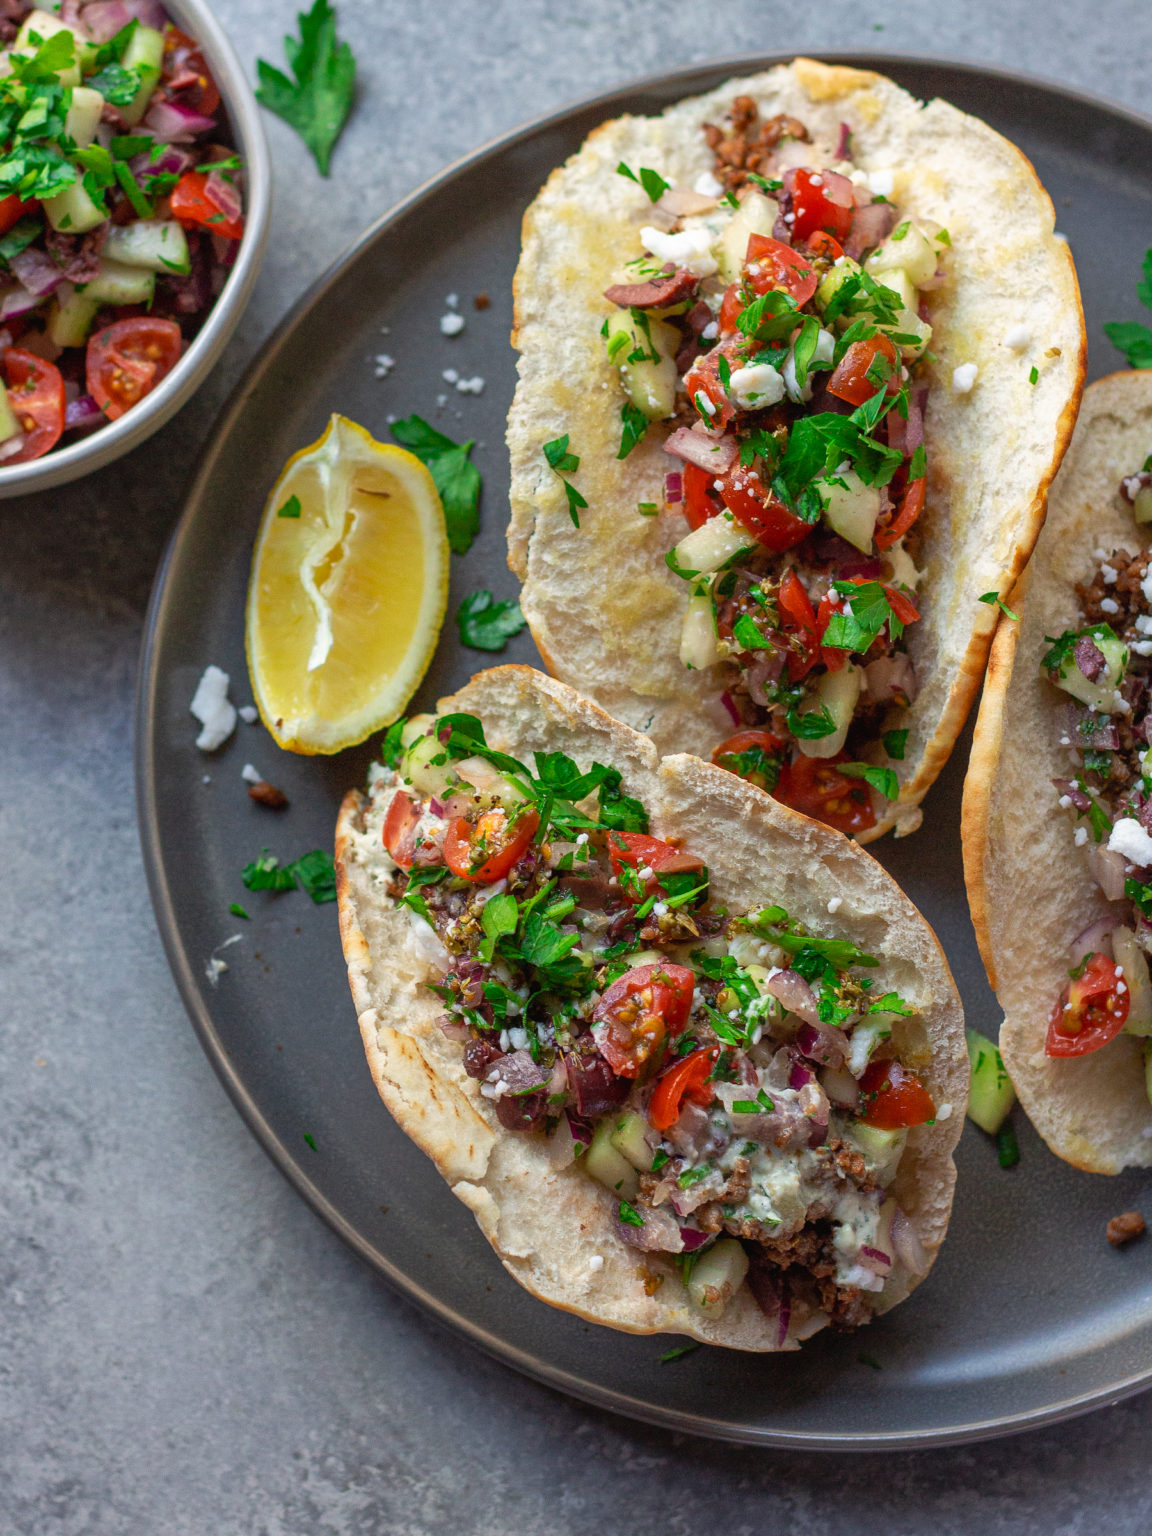 Mediterranean Style Tacos - Eat Figs, Not Pigs